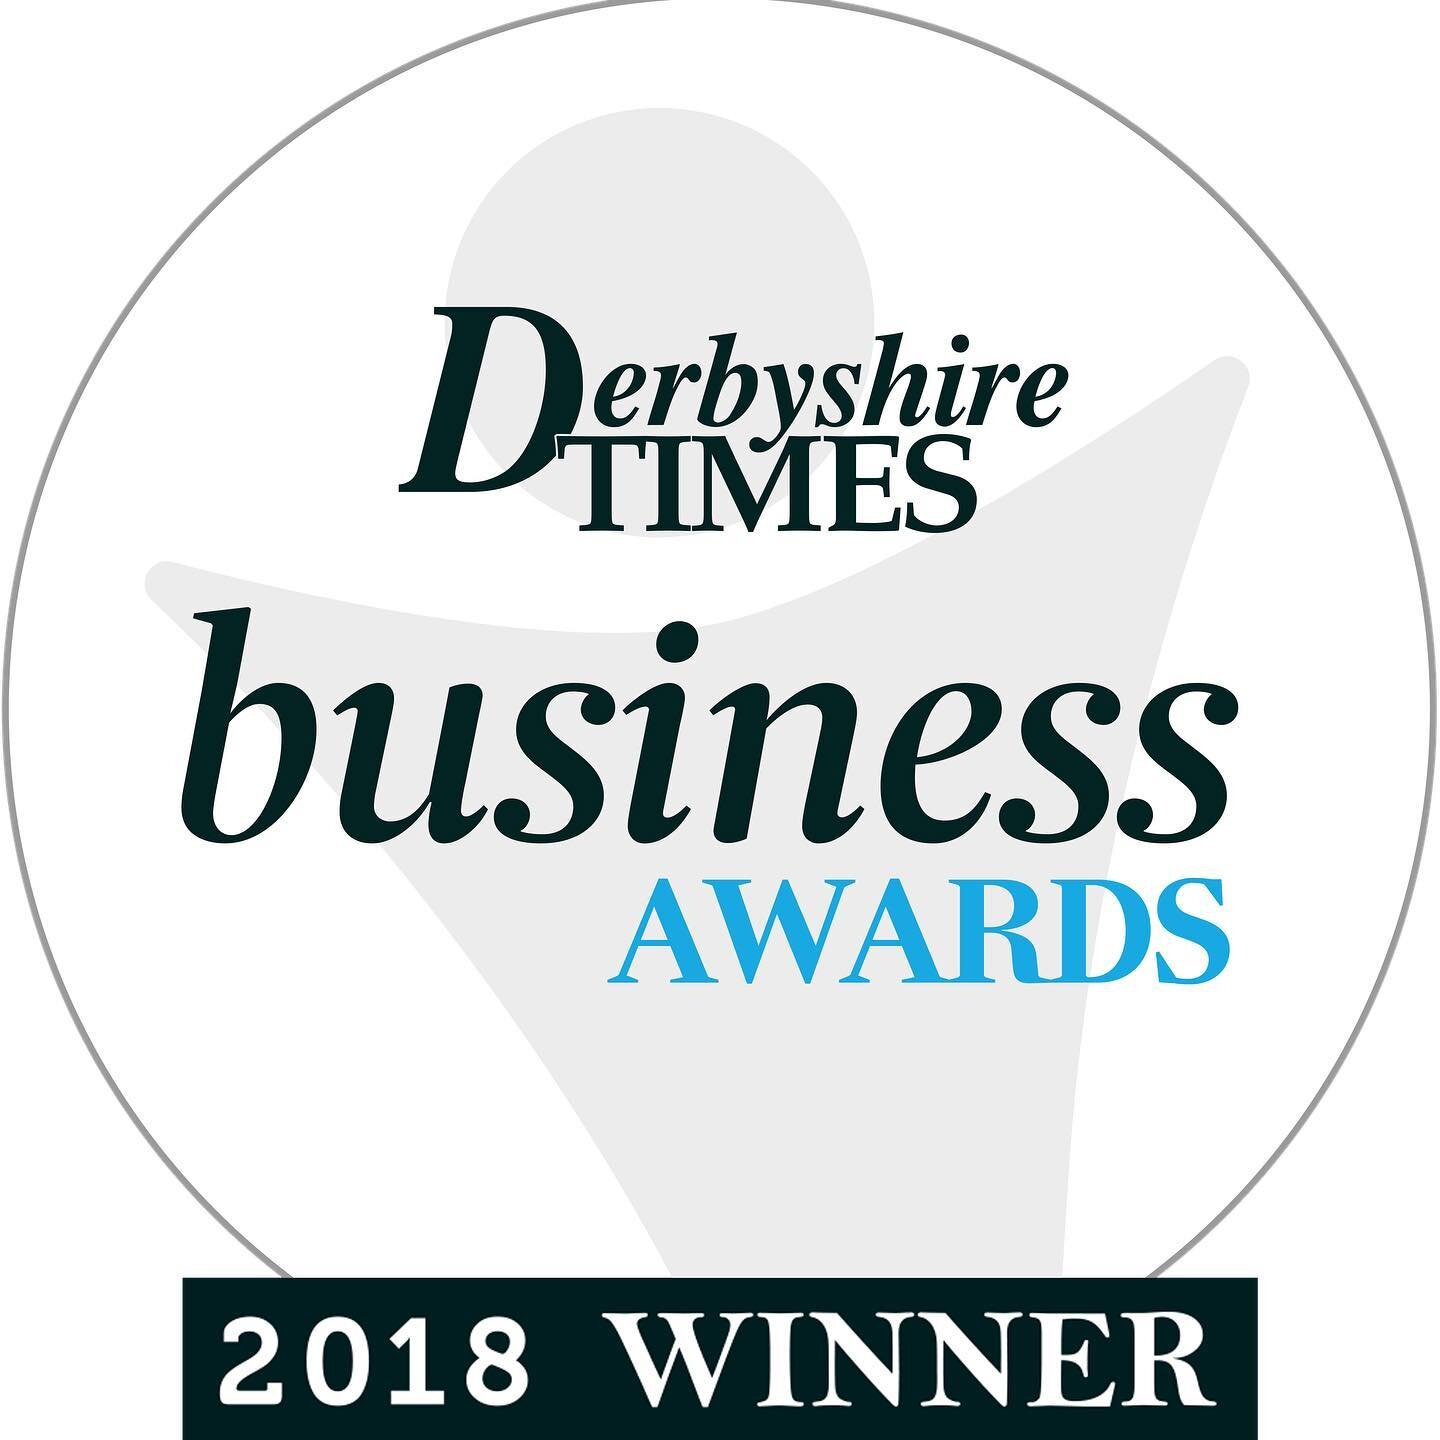 The Derbyshire Times Business Award for People Development was given to A-Rock Construction for our commitment to training. The team achieved 78 qualifications over a 12 month period with staff from 16 - 70yrs achieving a certification. Well done Tea